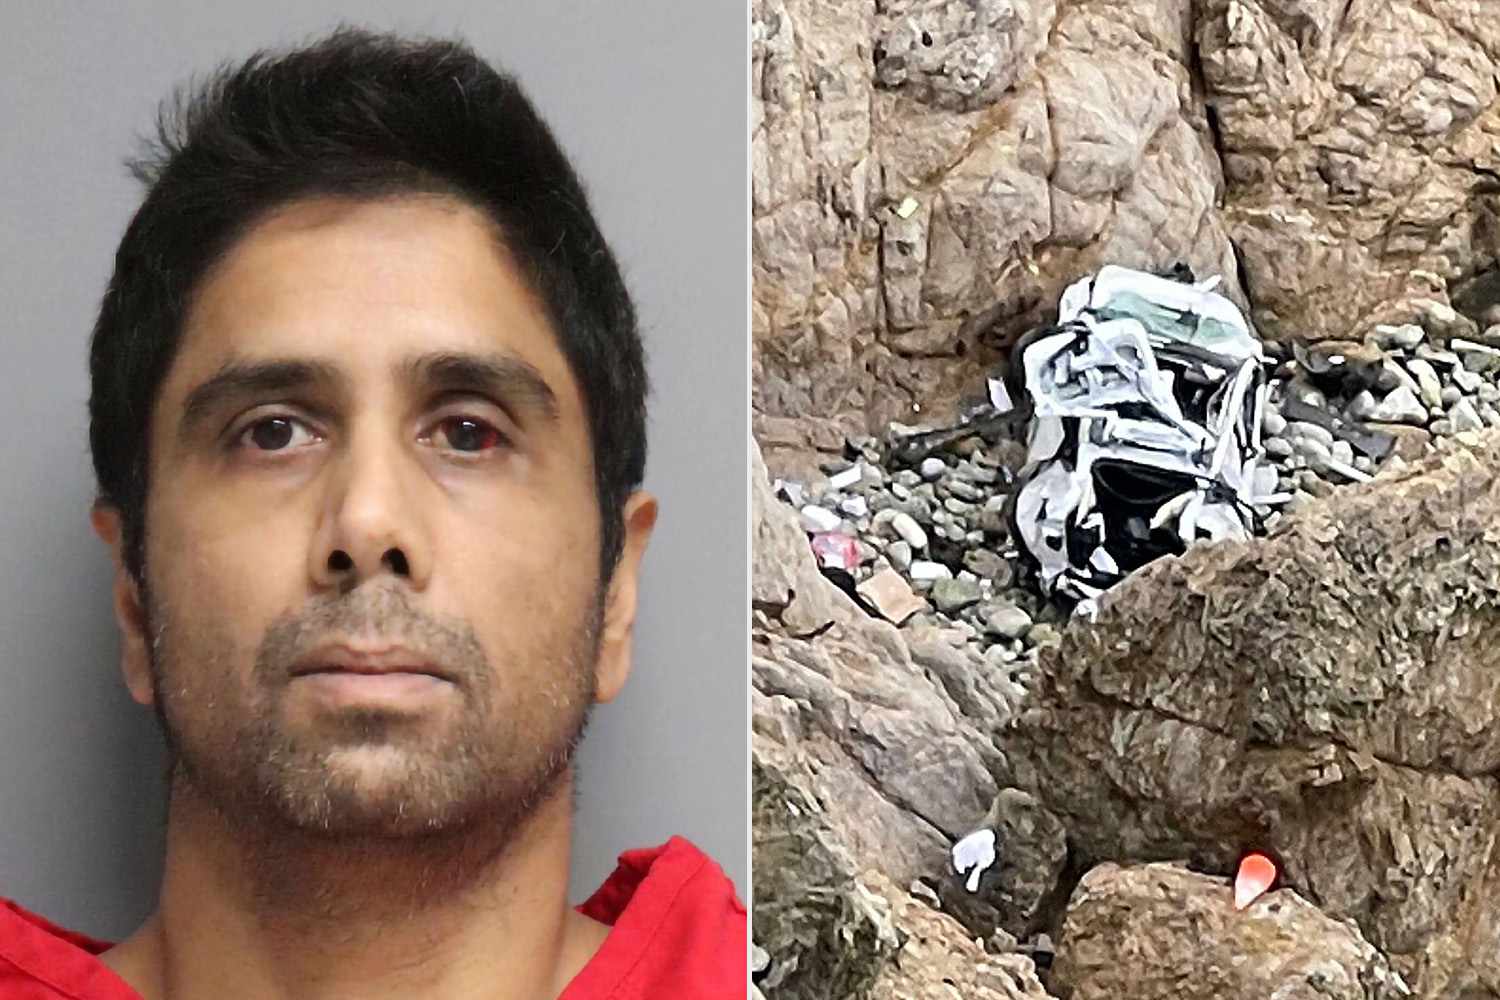 Doctor Who Drove Tesla Off Cliff with Family Inside Thought Kids Would Be Sex Trafficked: D.A.